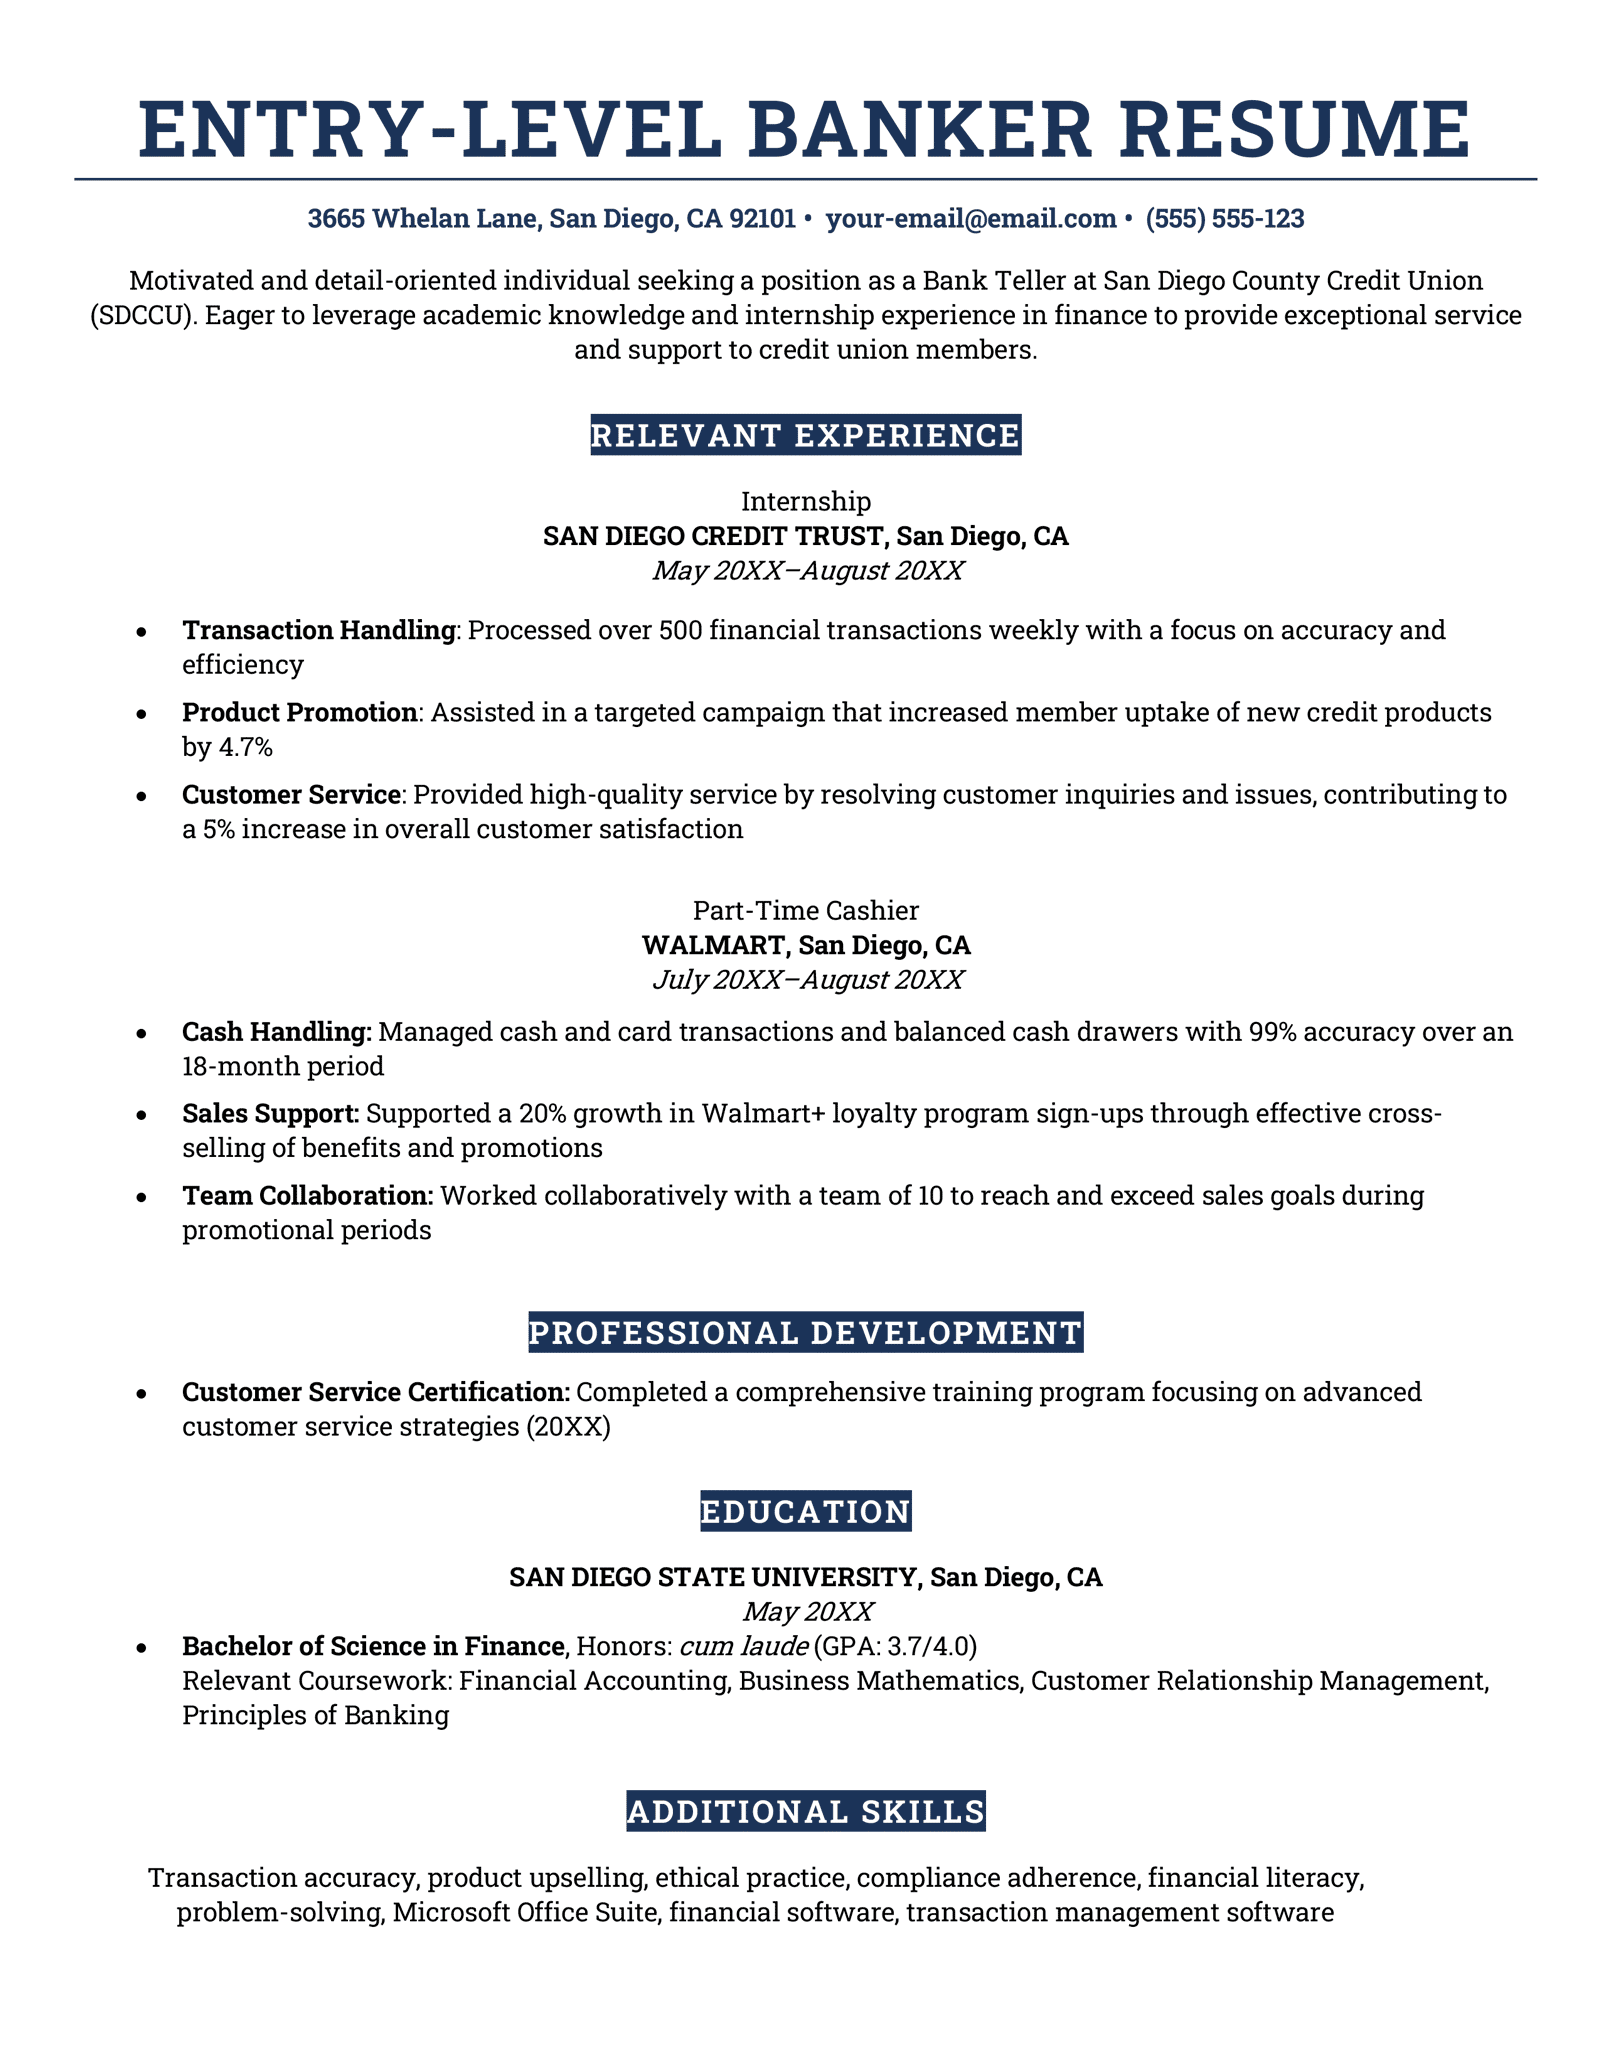 An entry-level banker resume that uses a crisp navy blue color scheme and smart block-colour backgrounds for each section heading.